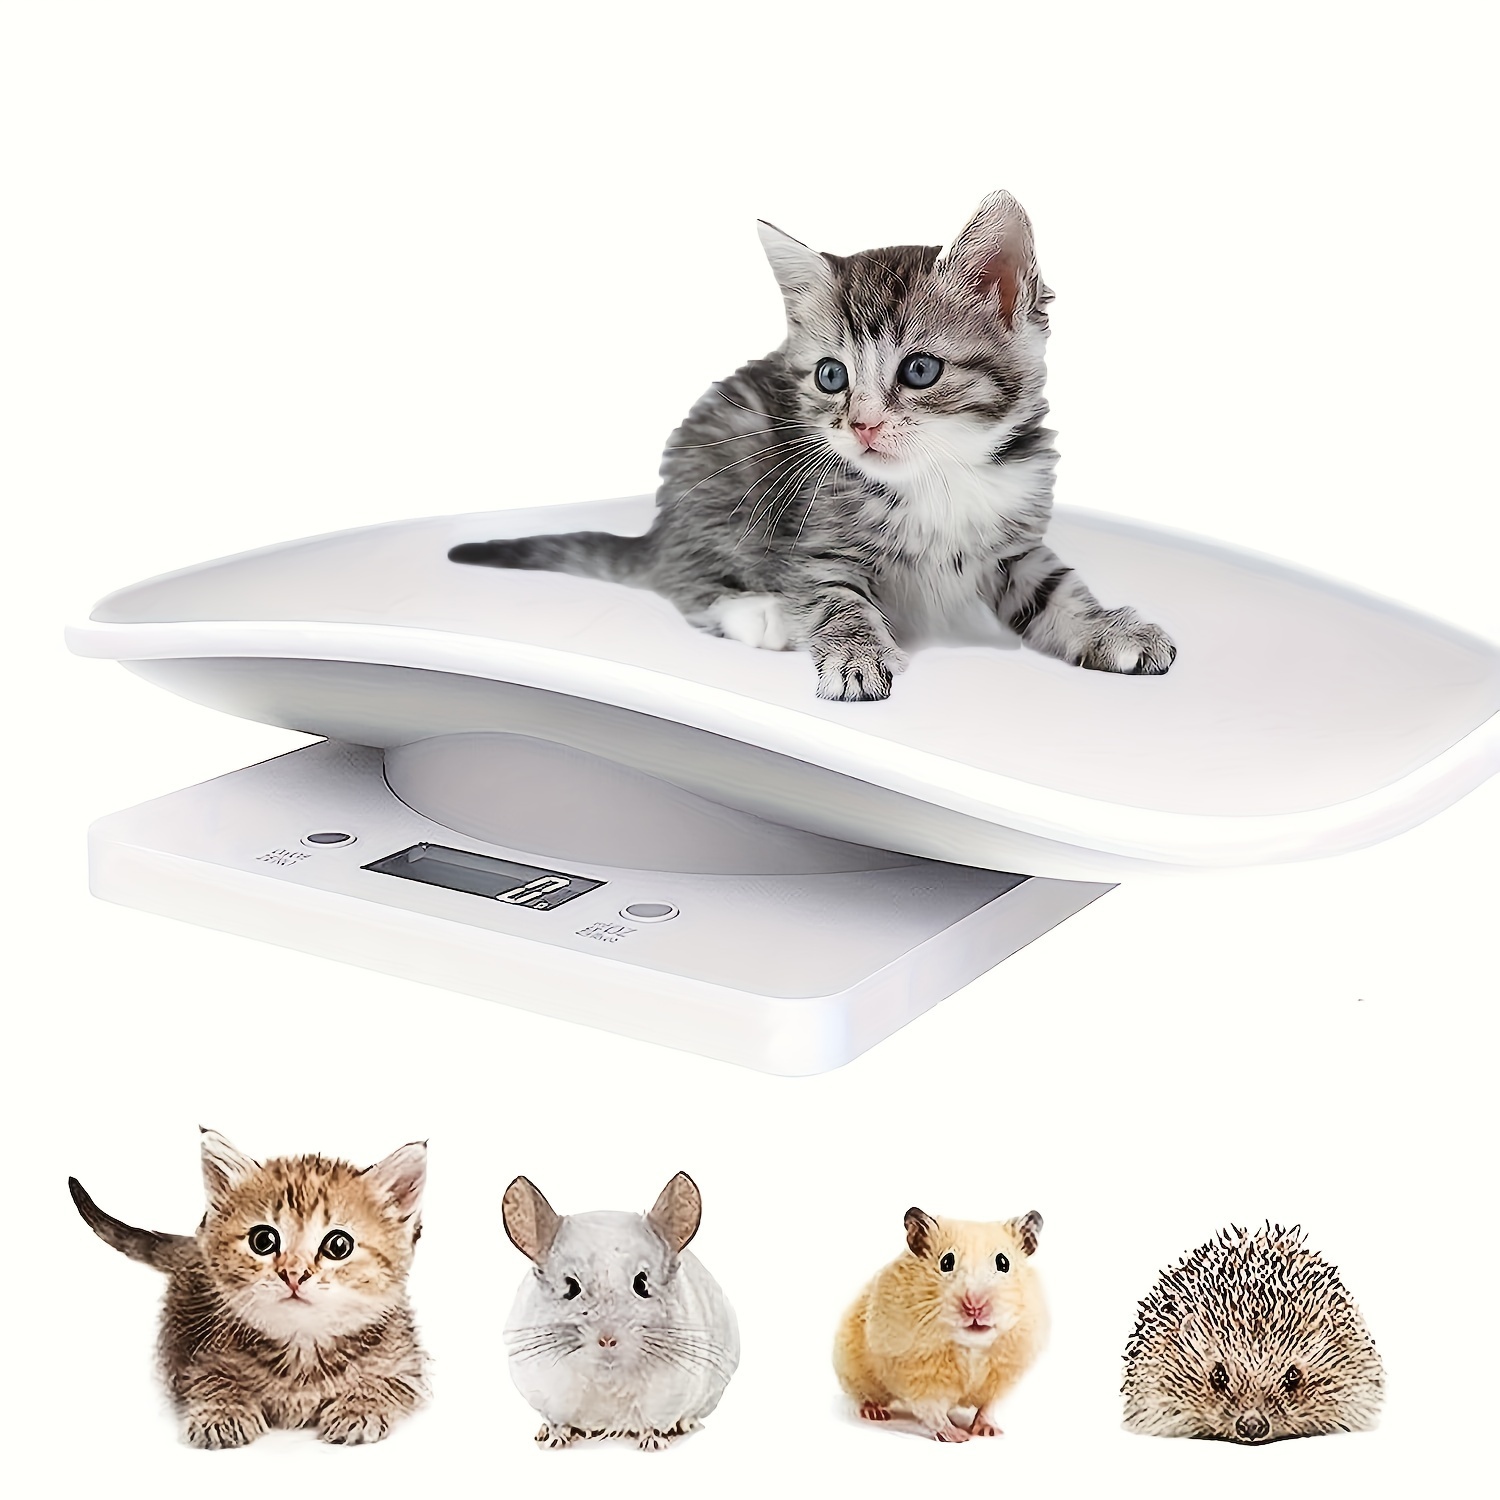 Digital Baby Scale, Infant Scale for Weighing in Pounds, Ounces, or  Kilograms up to 44 lbs, Newborn Baby Scale with Hold Function, Pet Scale  for Cats and Dogs